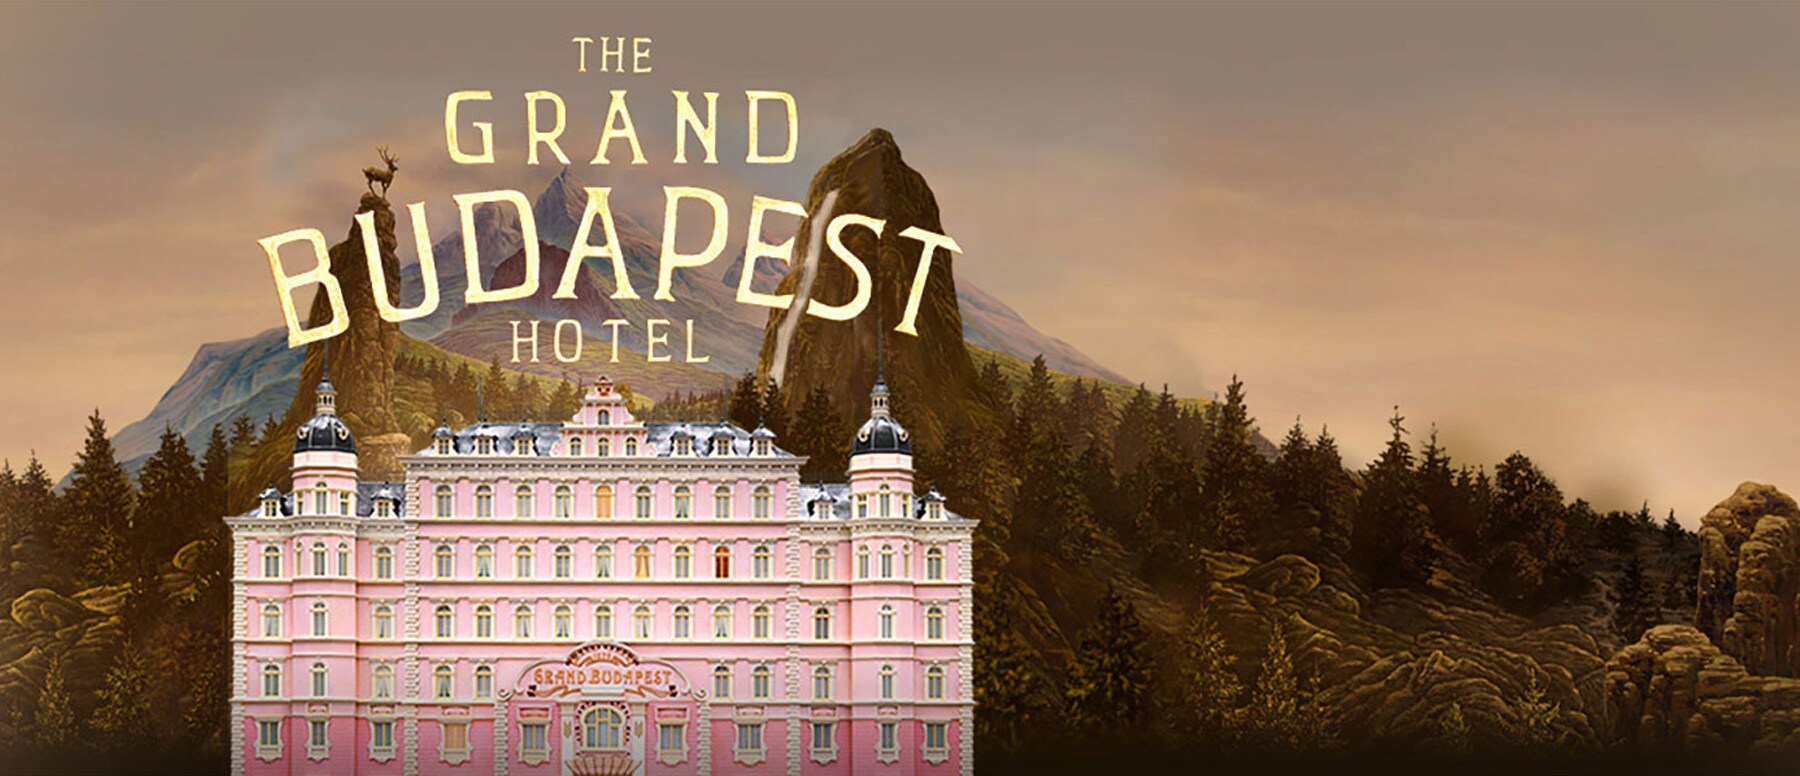 34-facts-about-the-movie-the-grand-budapest-hotel